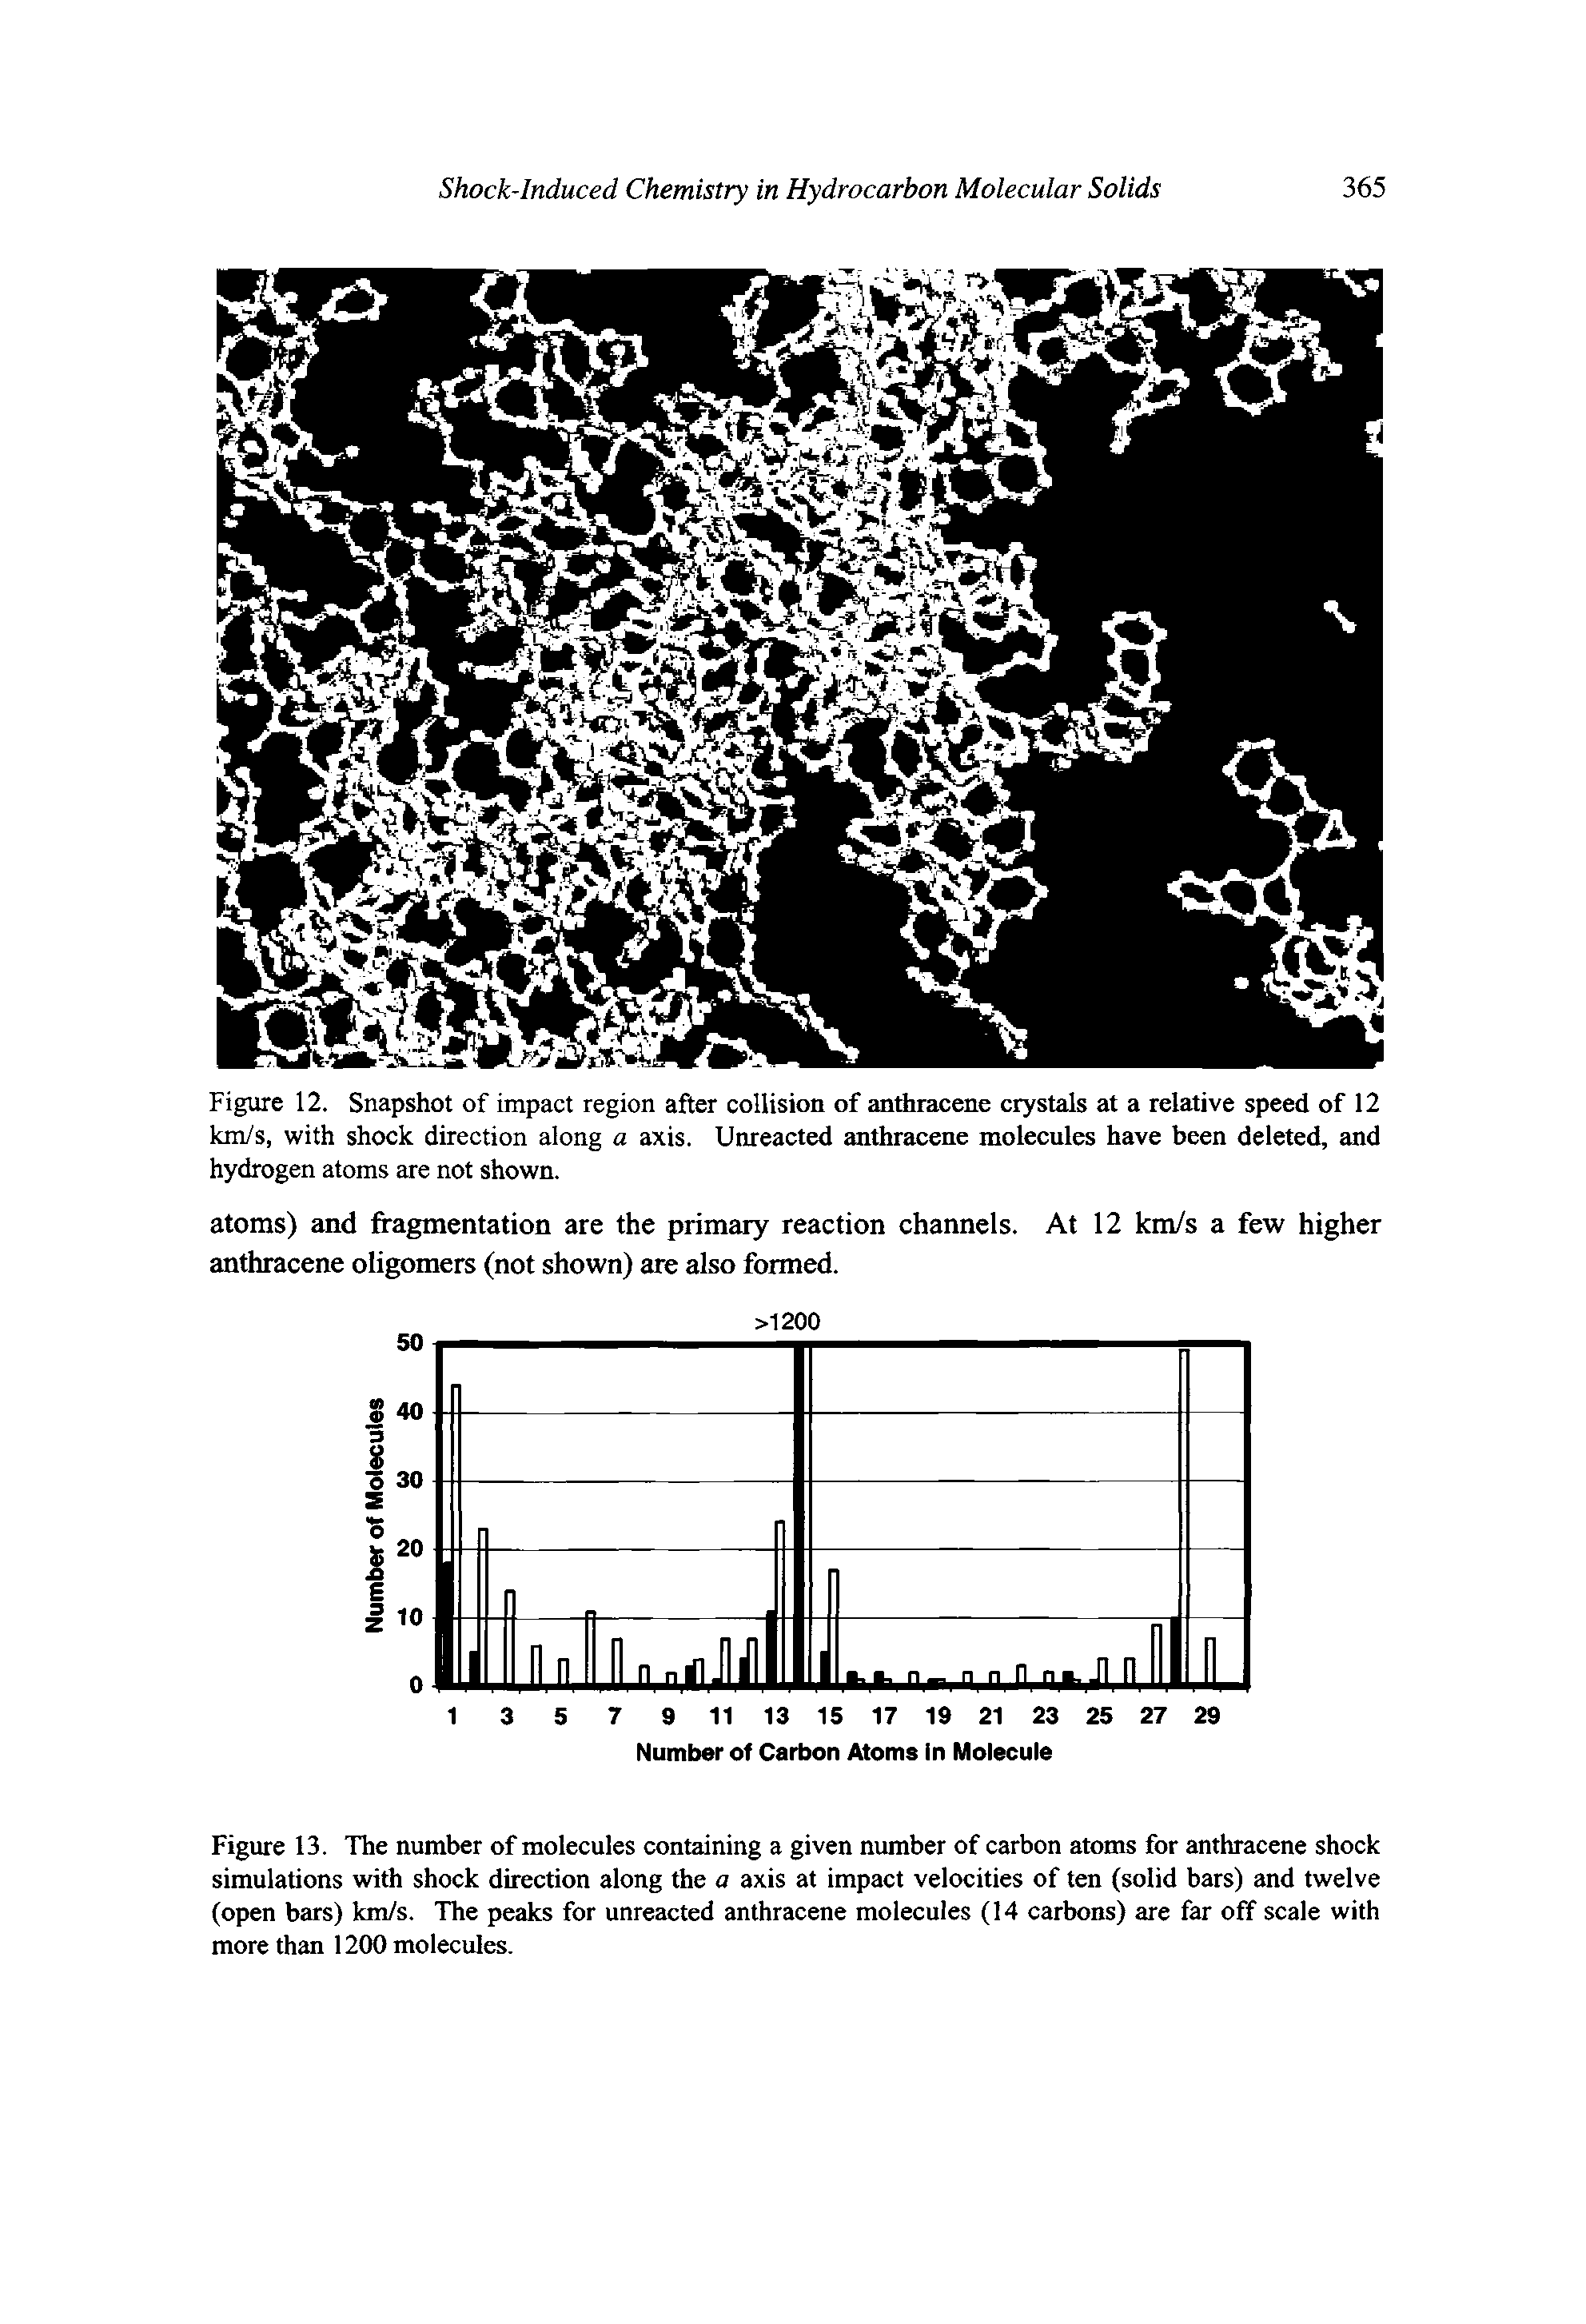 Figure 13. The number of molecules containing a given number of carbon atoms for anthracene shock simulations with shock direction along the a axis at impact velocities of ten (solid bars) and twelve (open bars) km/s. The peaks for unreacted anthracene molecules (14 carbons) are far off scale with more than 1200 molecules.